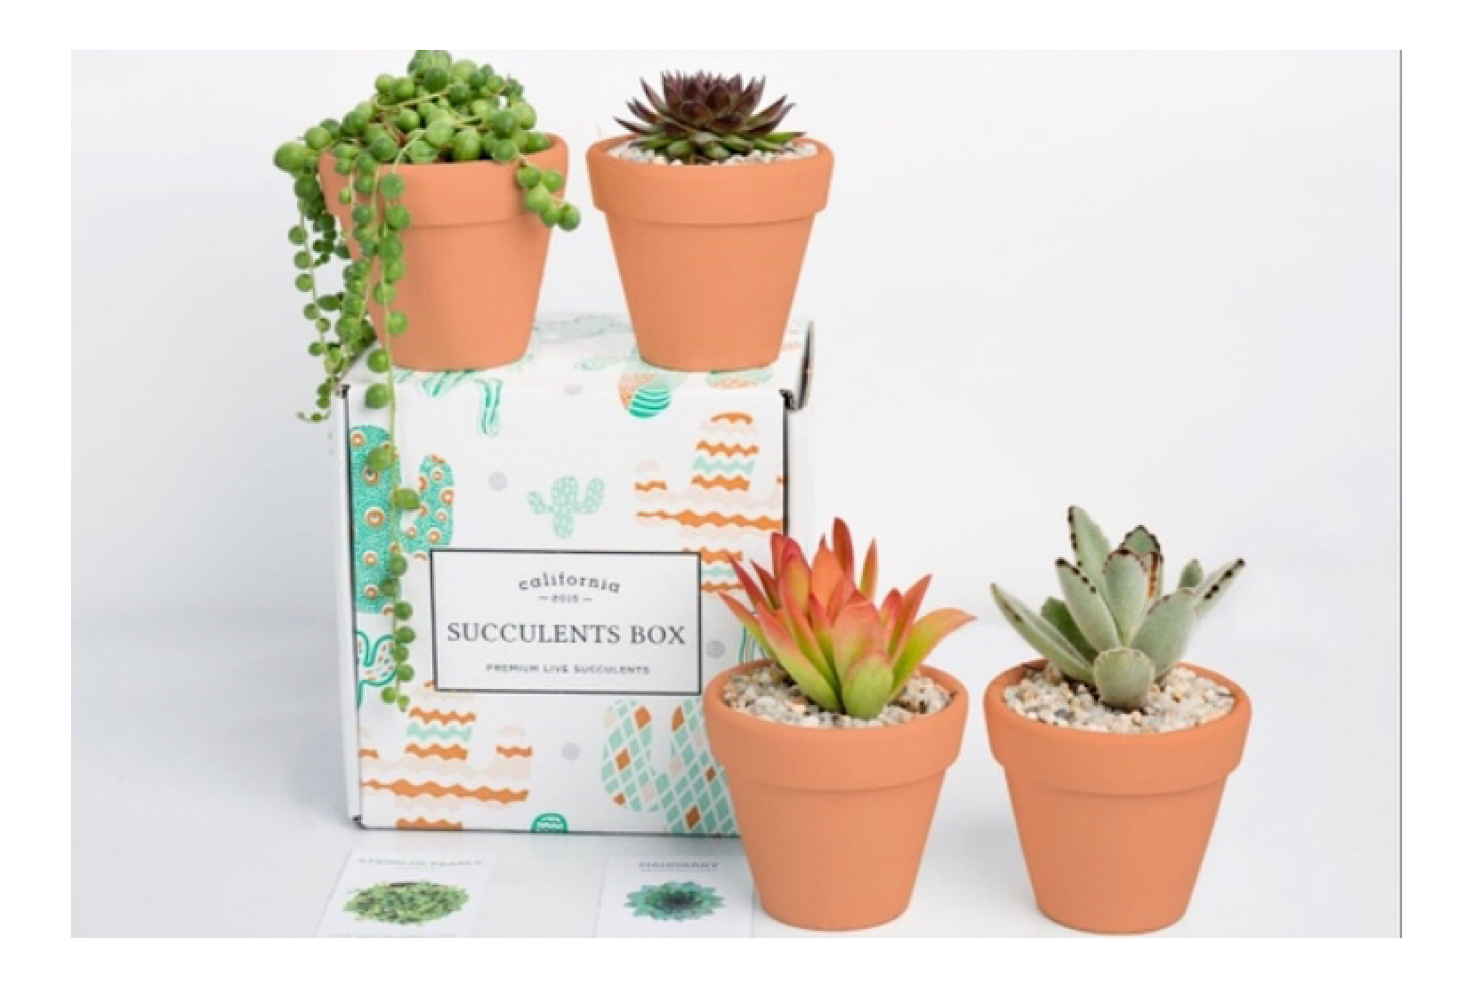 Succulents Box Black Friday Deal – 25% Off All Orders!